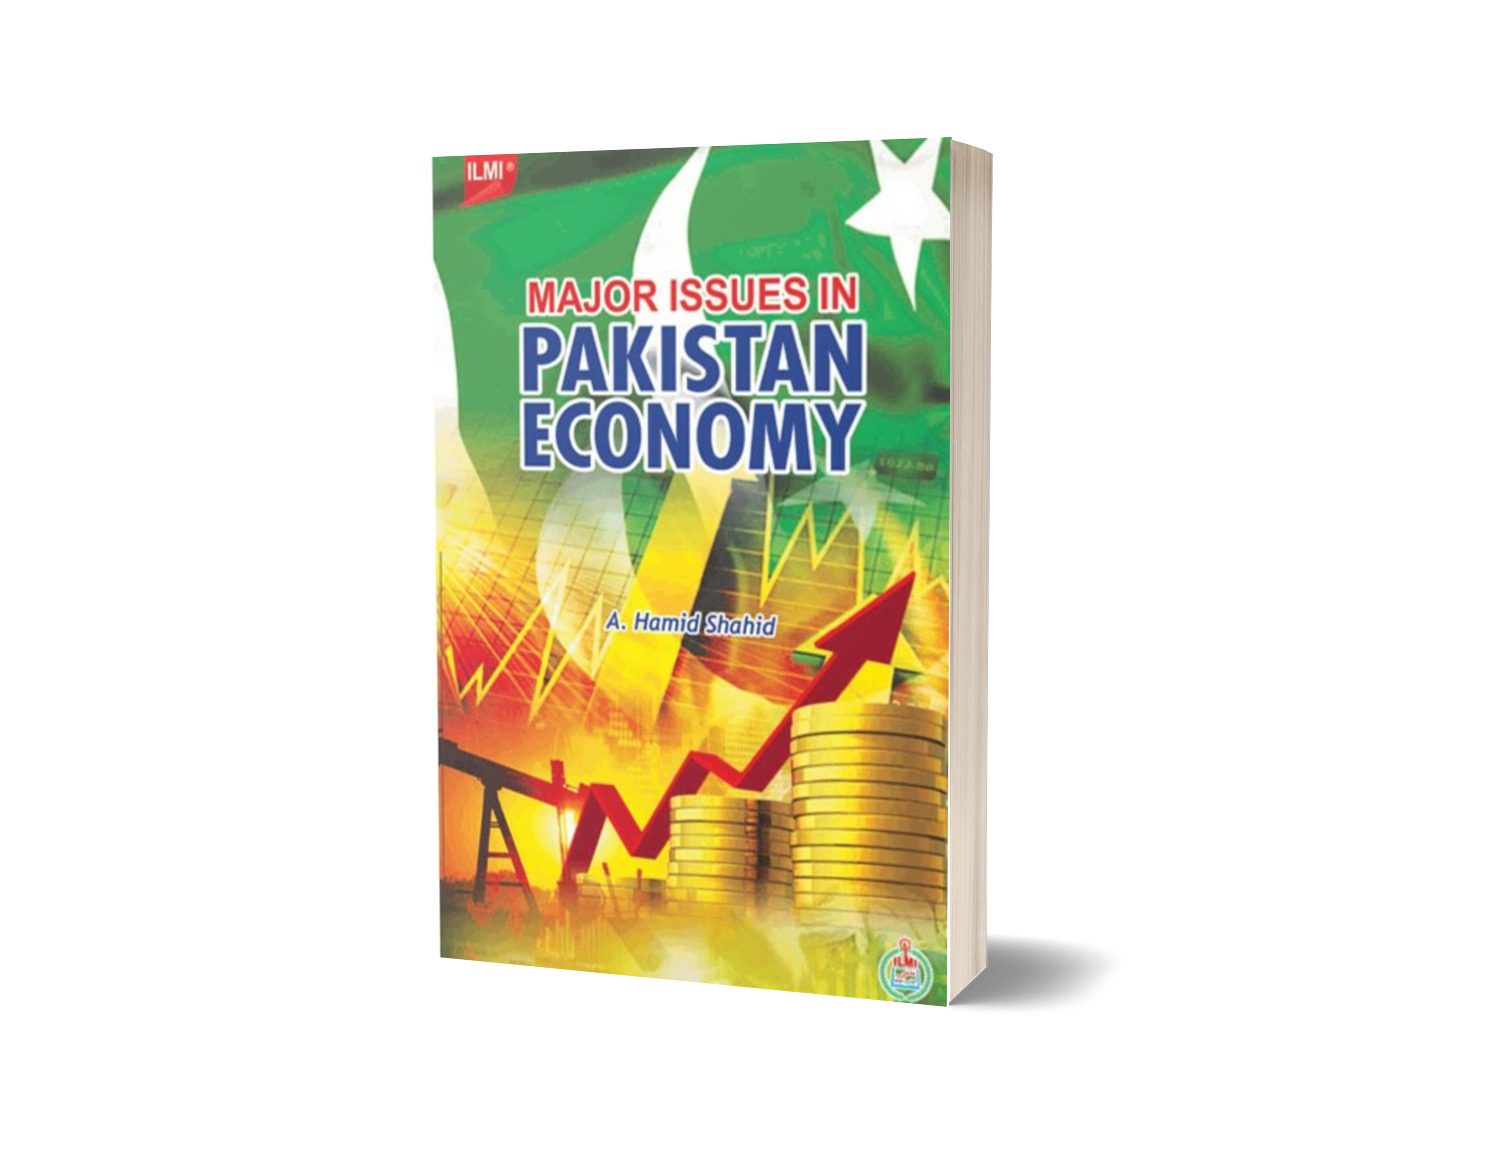 Major Issues In Pakistan Economy For B.S.(Economics) By A.Hamid shahid